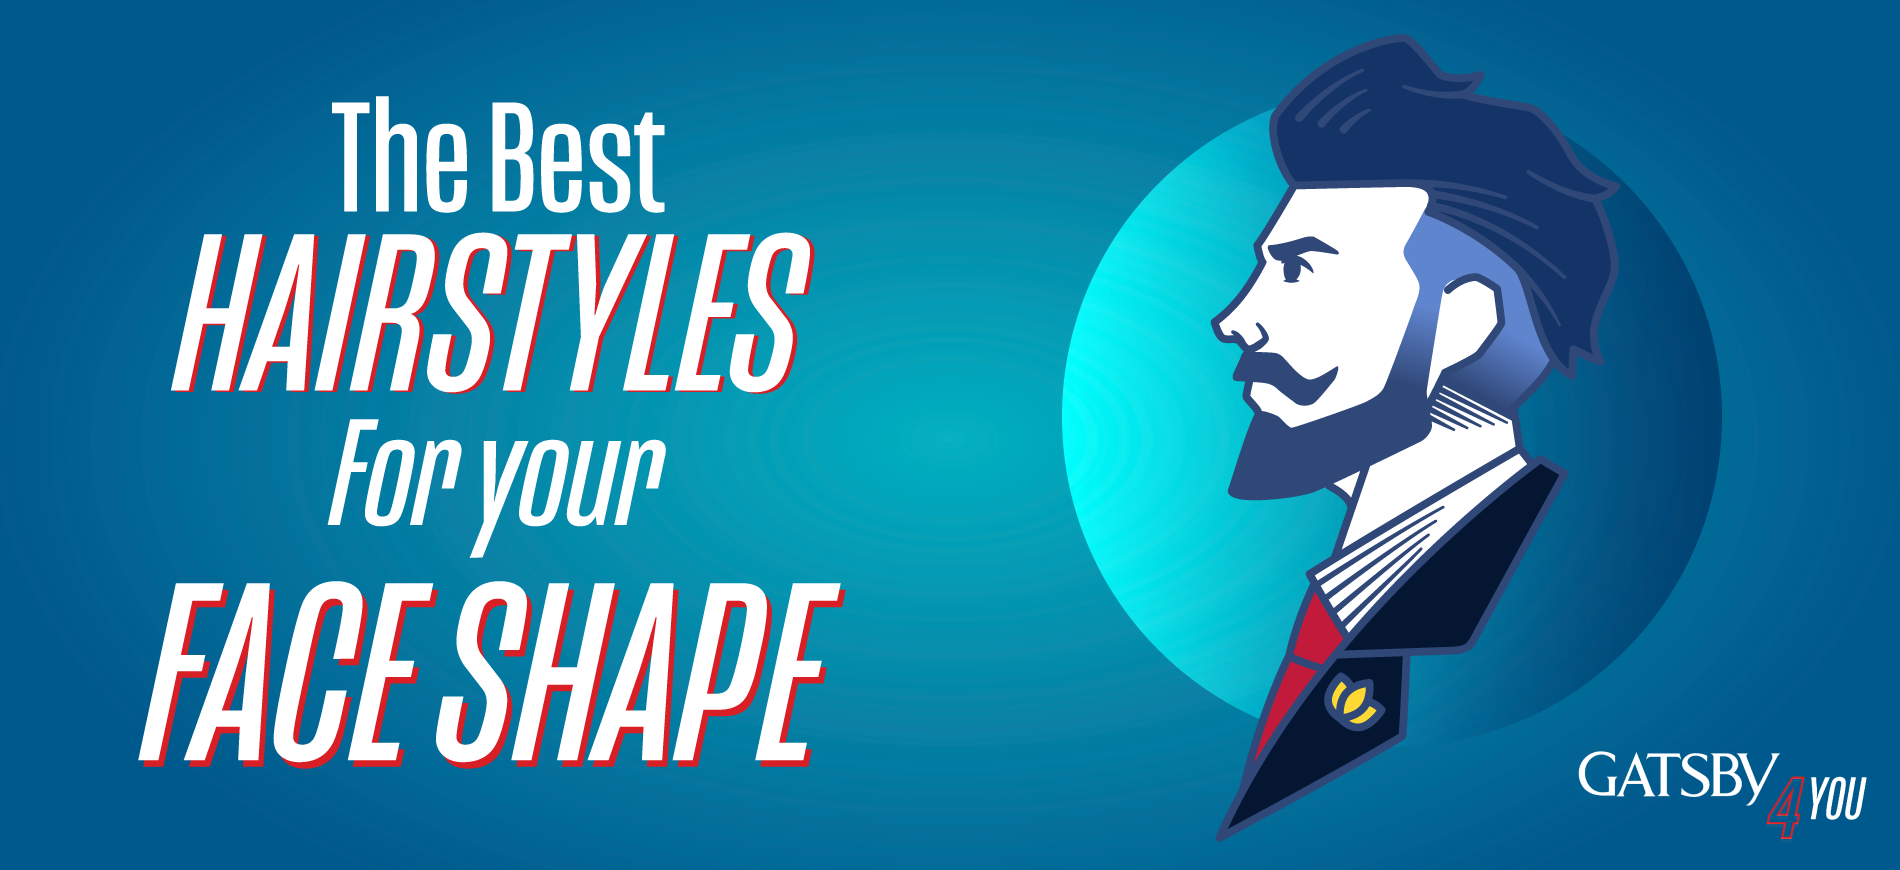 The Best Hairstyles for your Face Shape article banner